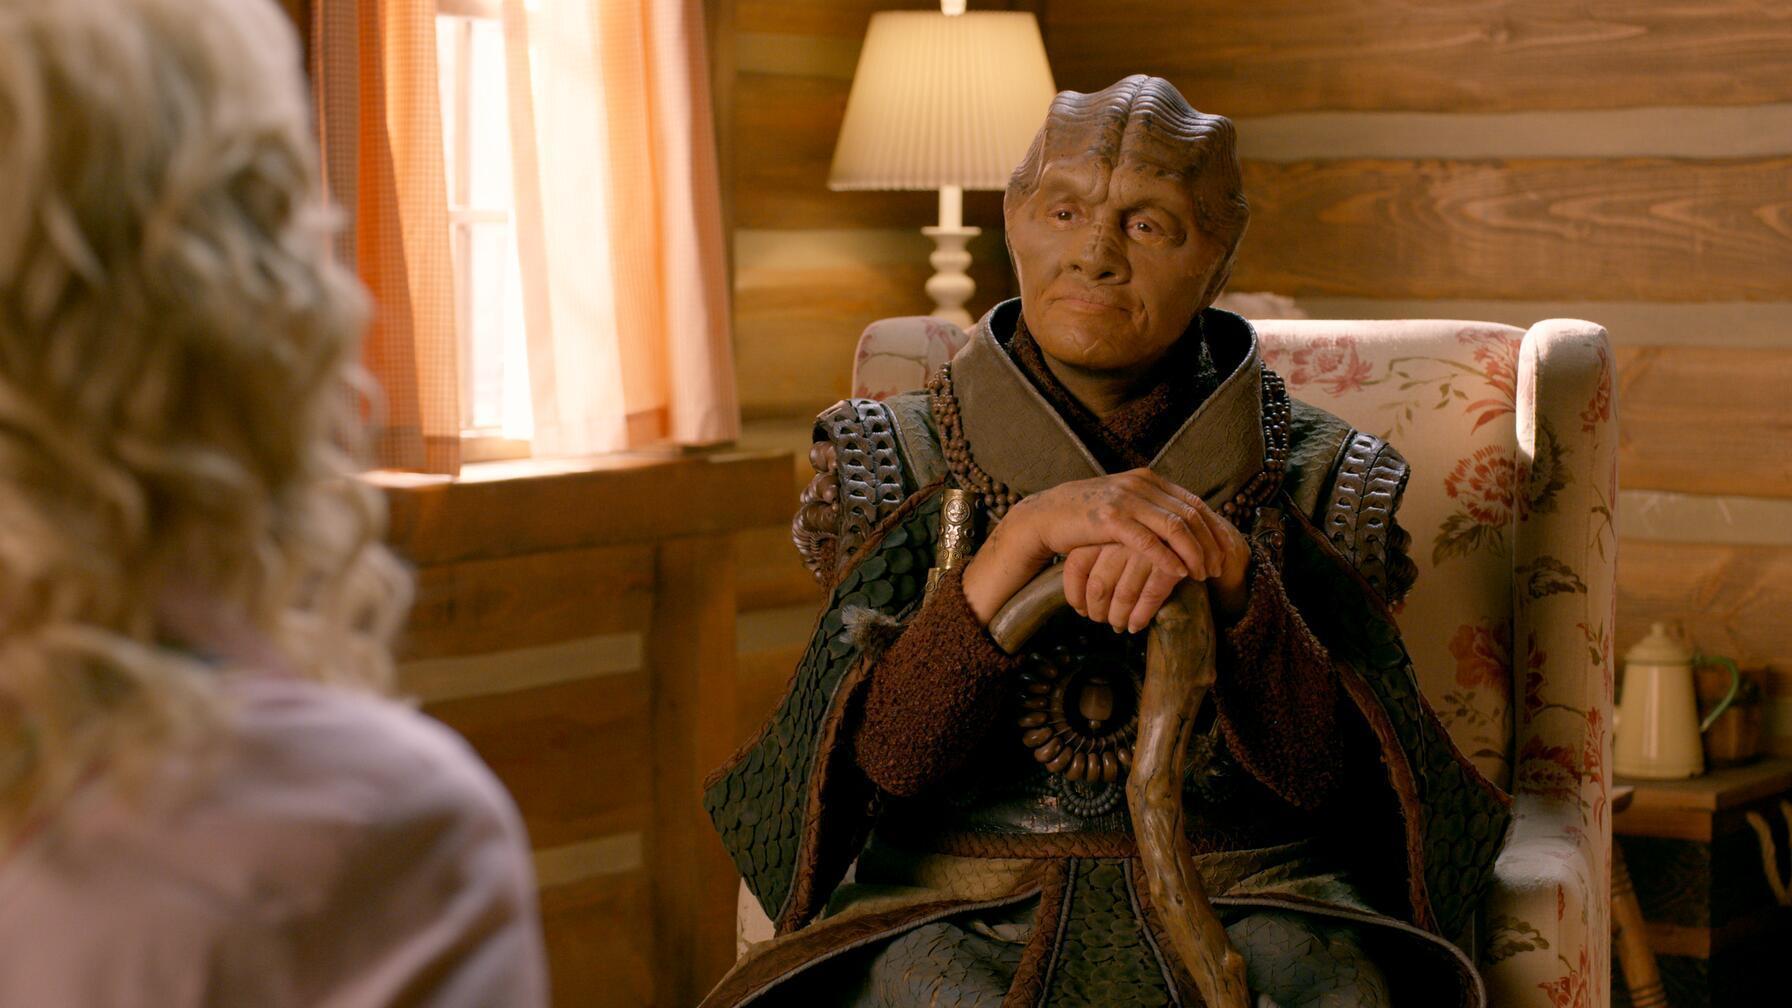 The Orville: New Horizons -- “Midnight Blue” - Episode 308 -- Kelly and Bortus are assigned to a mission that takes them to Heveena’s sanctuary world. Dolly Parton, and Heveena (Rena Owen), shown. (Photo by: Greg Gayne/Hulu)